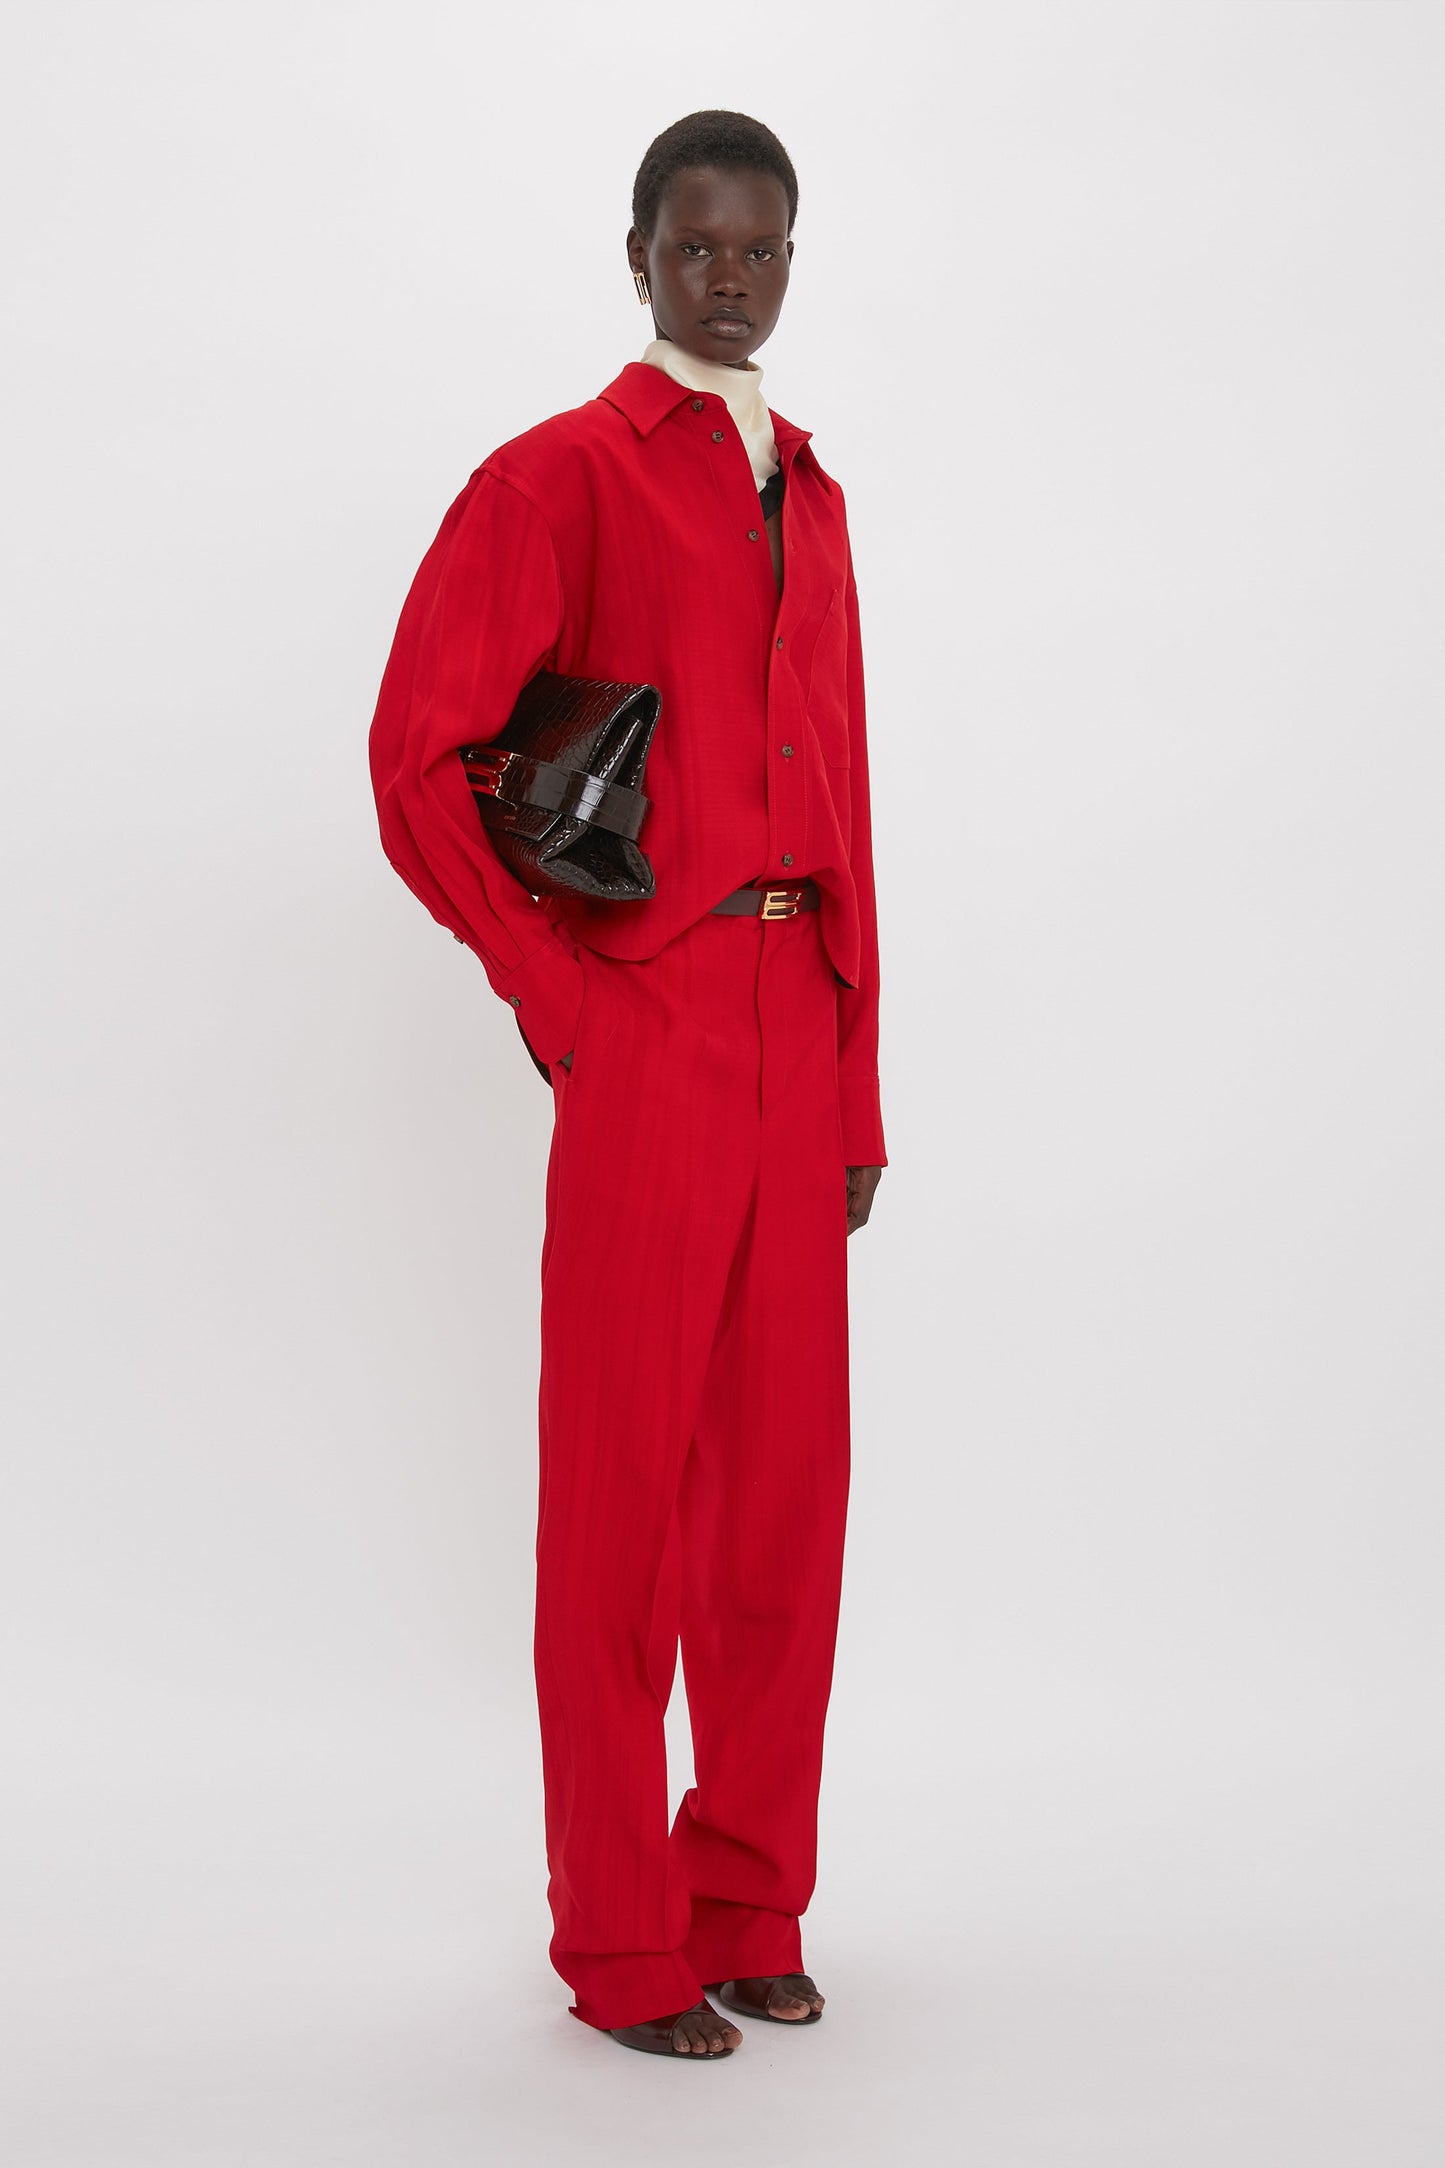 Person wearing a Carmine red button-up shirt and matching Tapered Leg Trouser In Carmine by Victoria Beckham, holding a black clutch bag, standing against a plain white background.